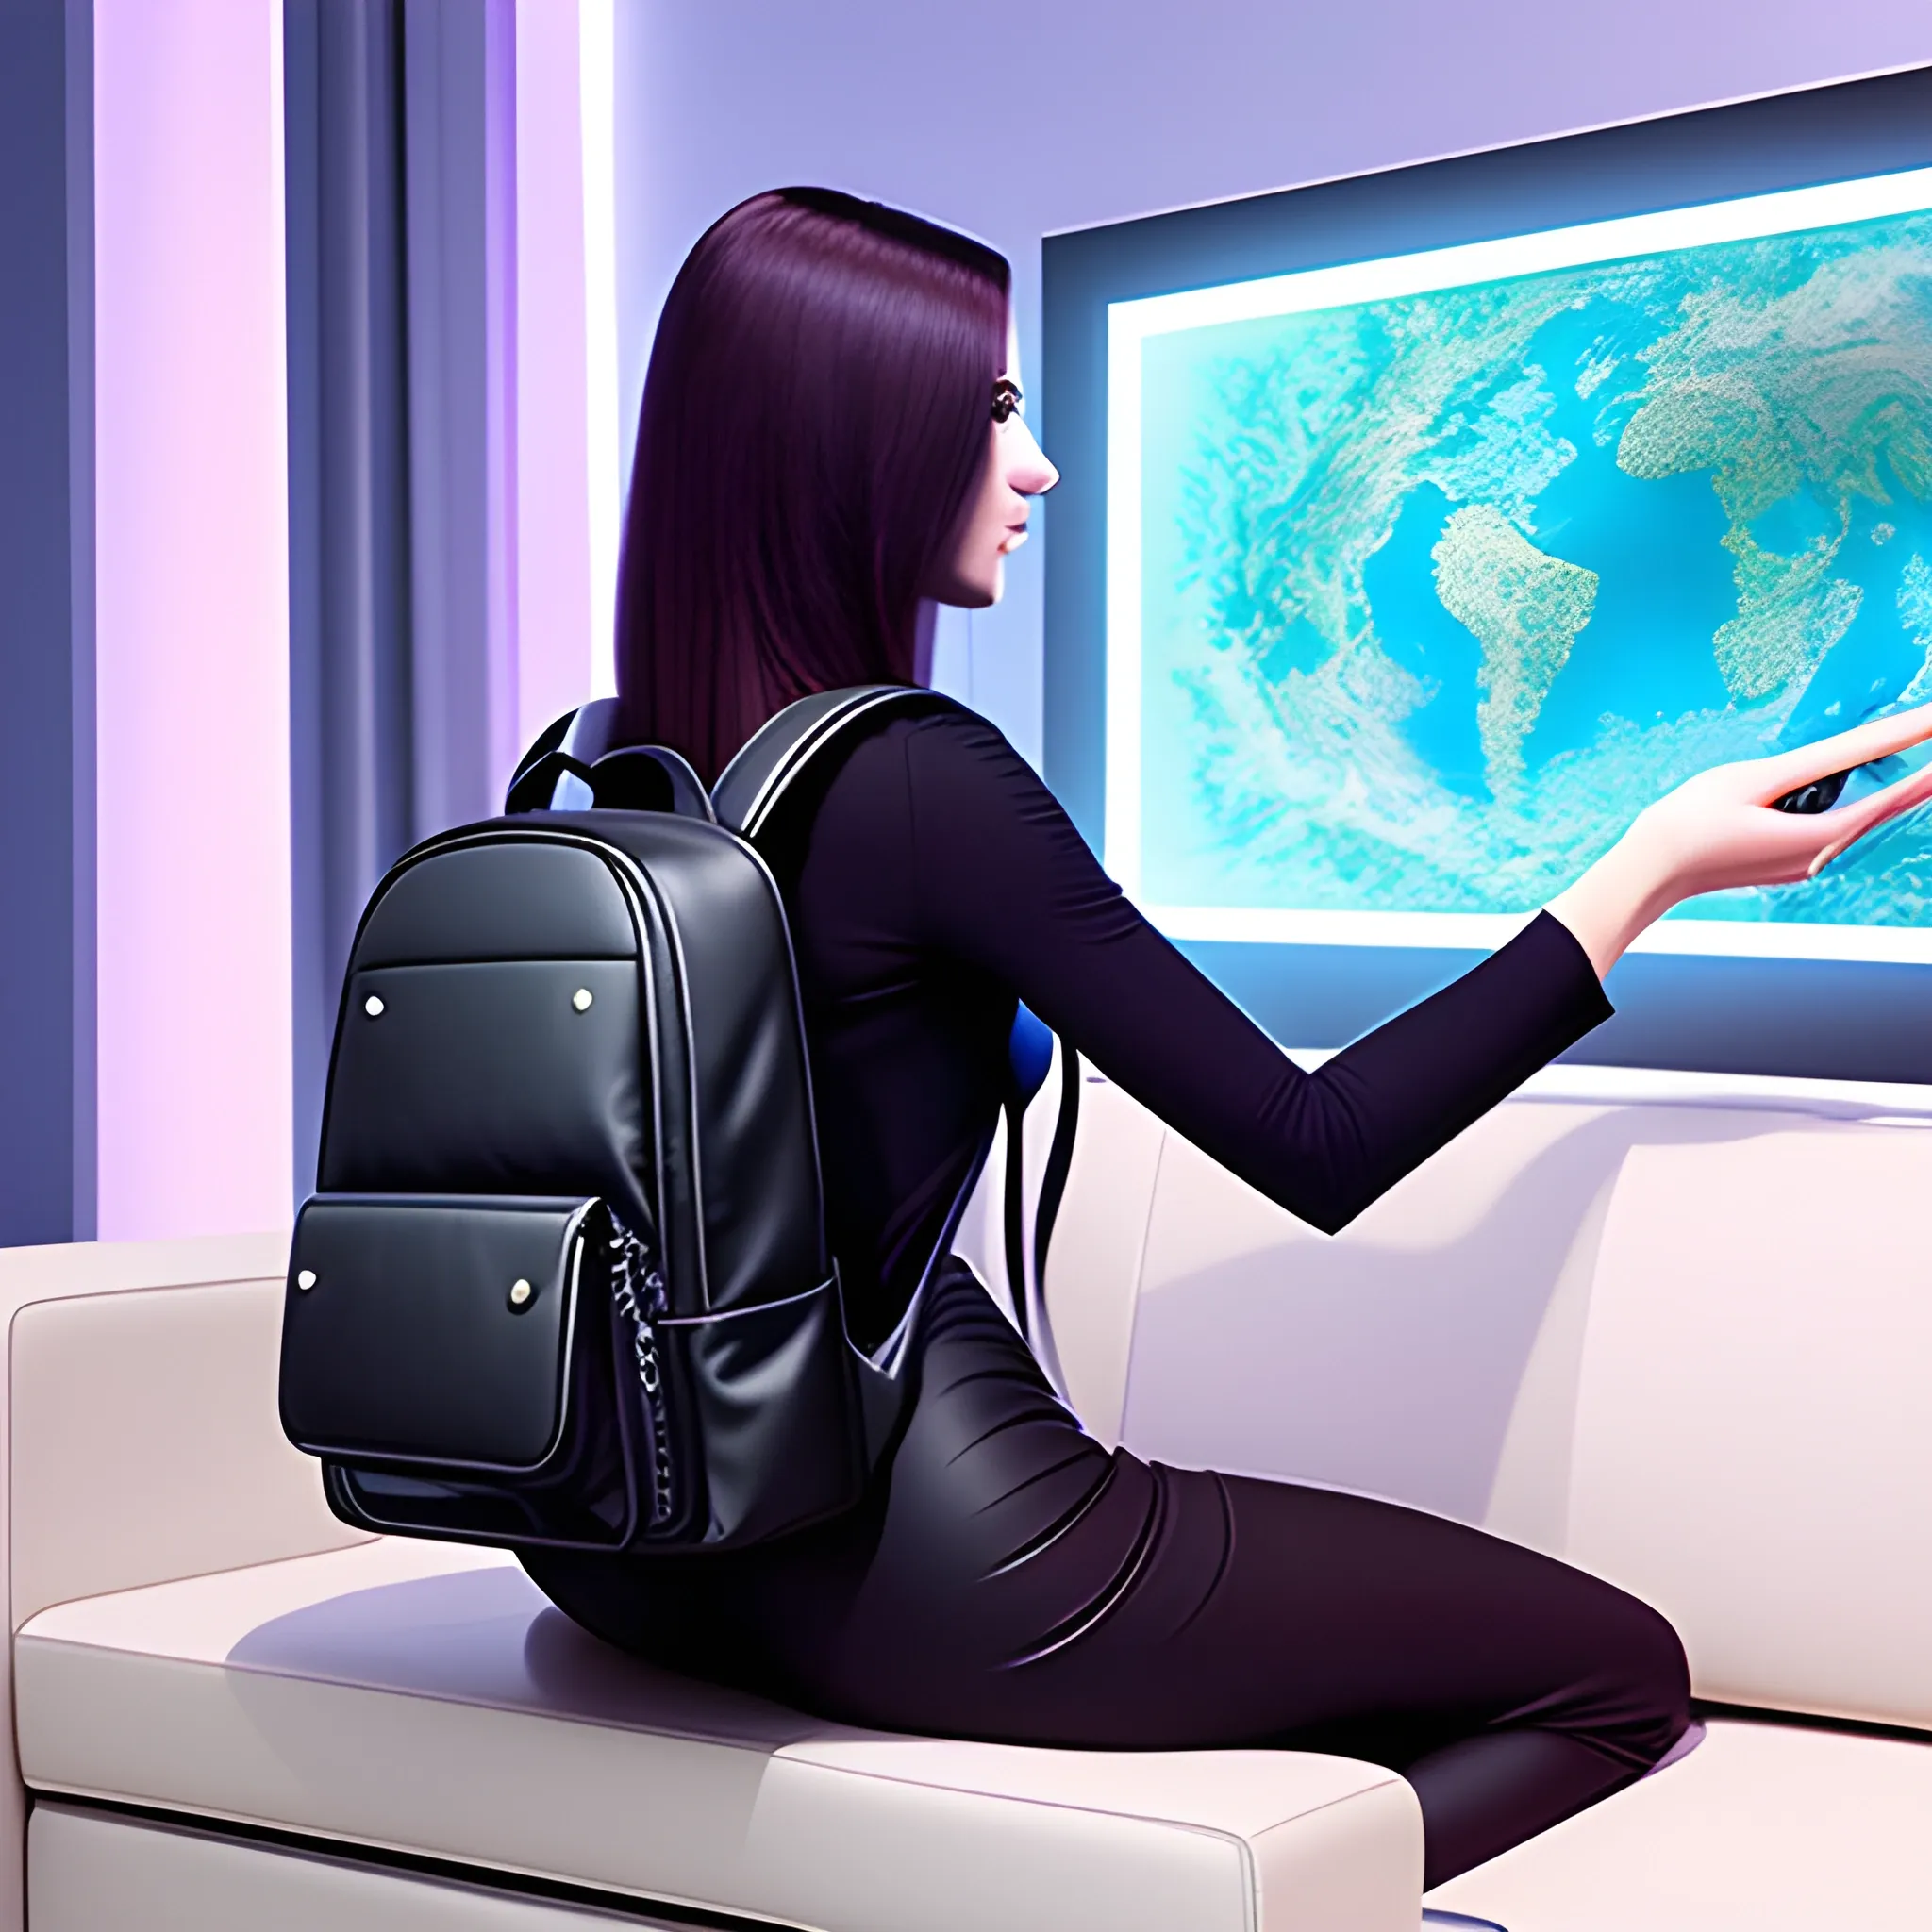 In the future world, people don't need to buy any things offline,a girl is sitting on the sofa,there is a transparent screen in front of her view, and she is choosing the designer backpack.